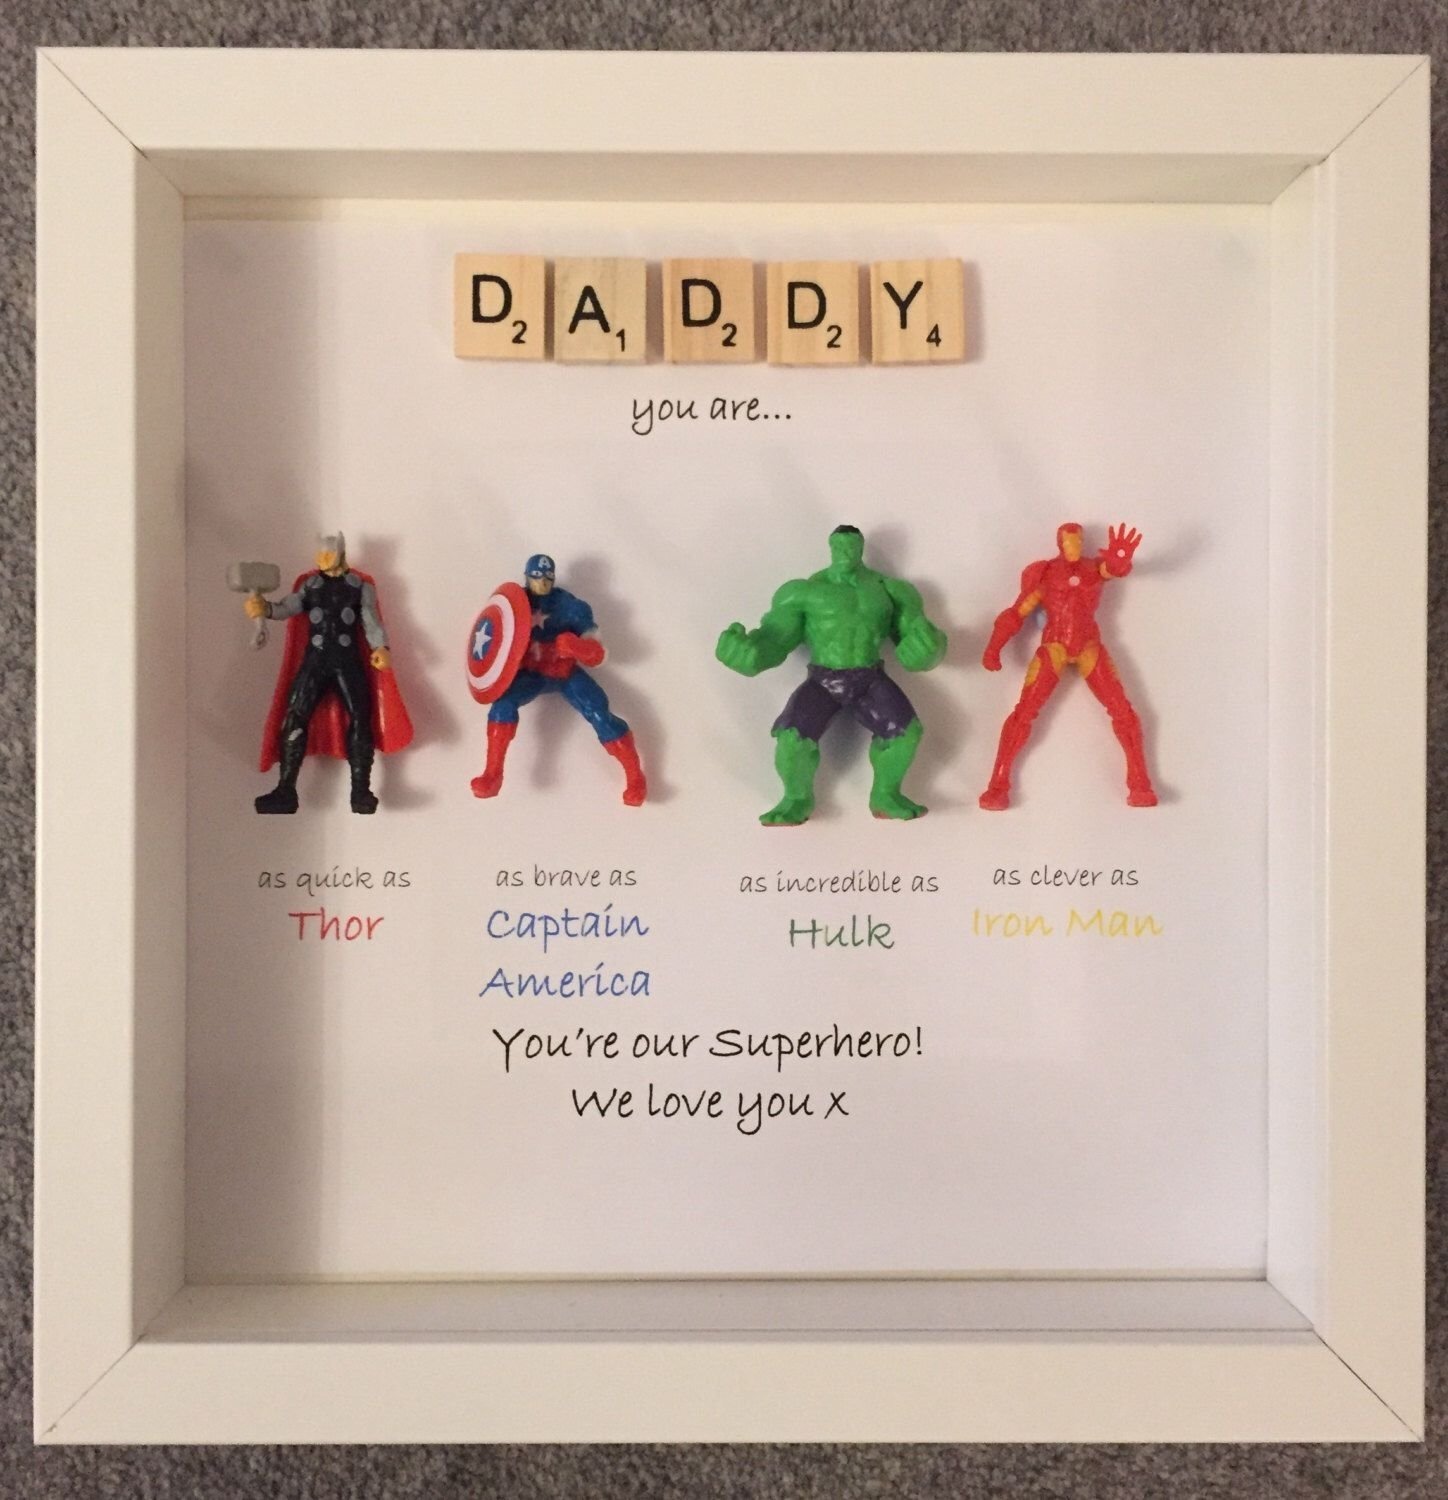 10 Unique Birthday Present Ideas For Dad avengers superhero figures frame gift ideal for dad brother 2022